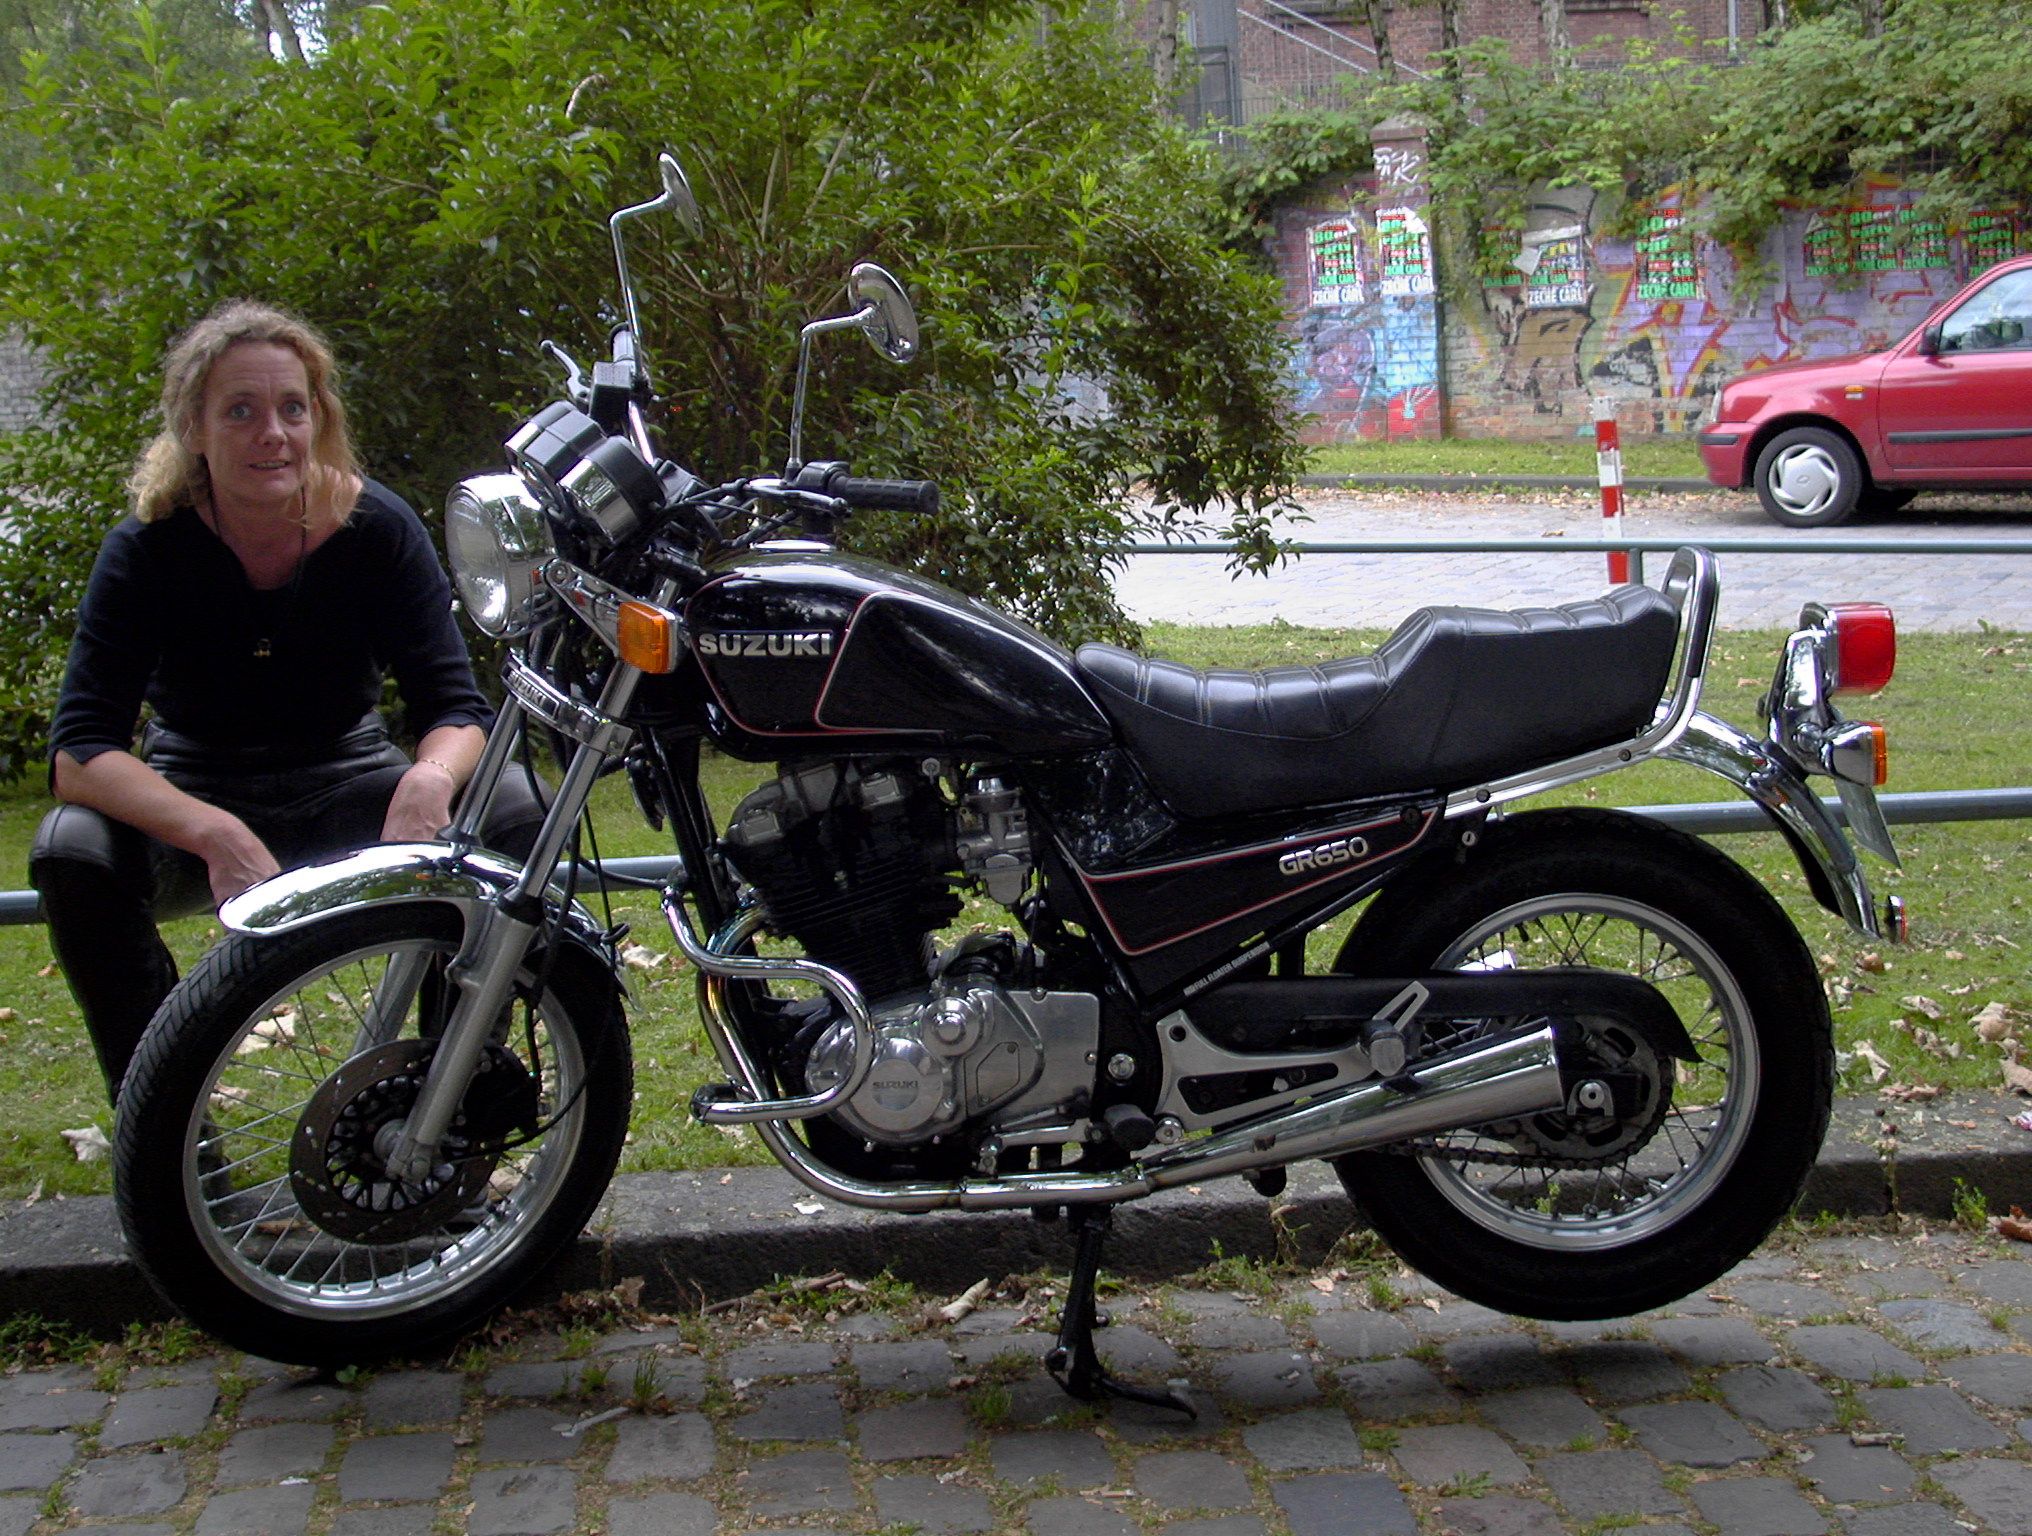 Review of Suzuki GR 650 1983 pictures, live photos